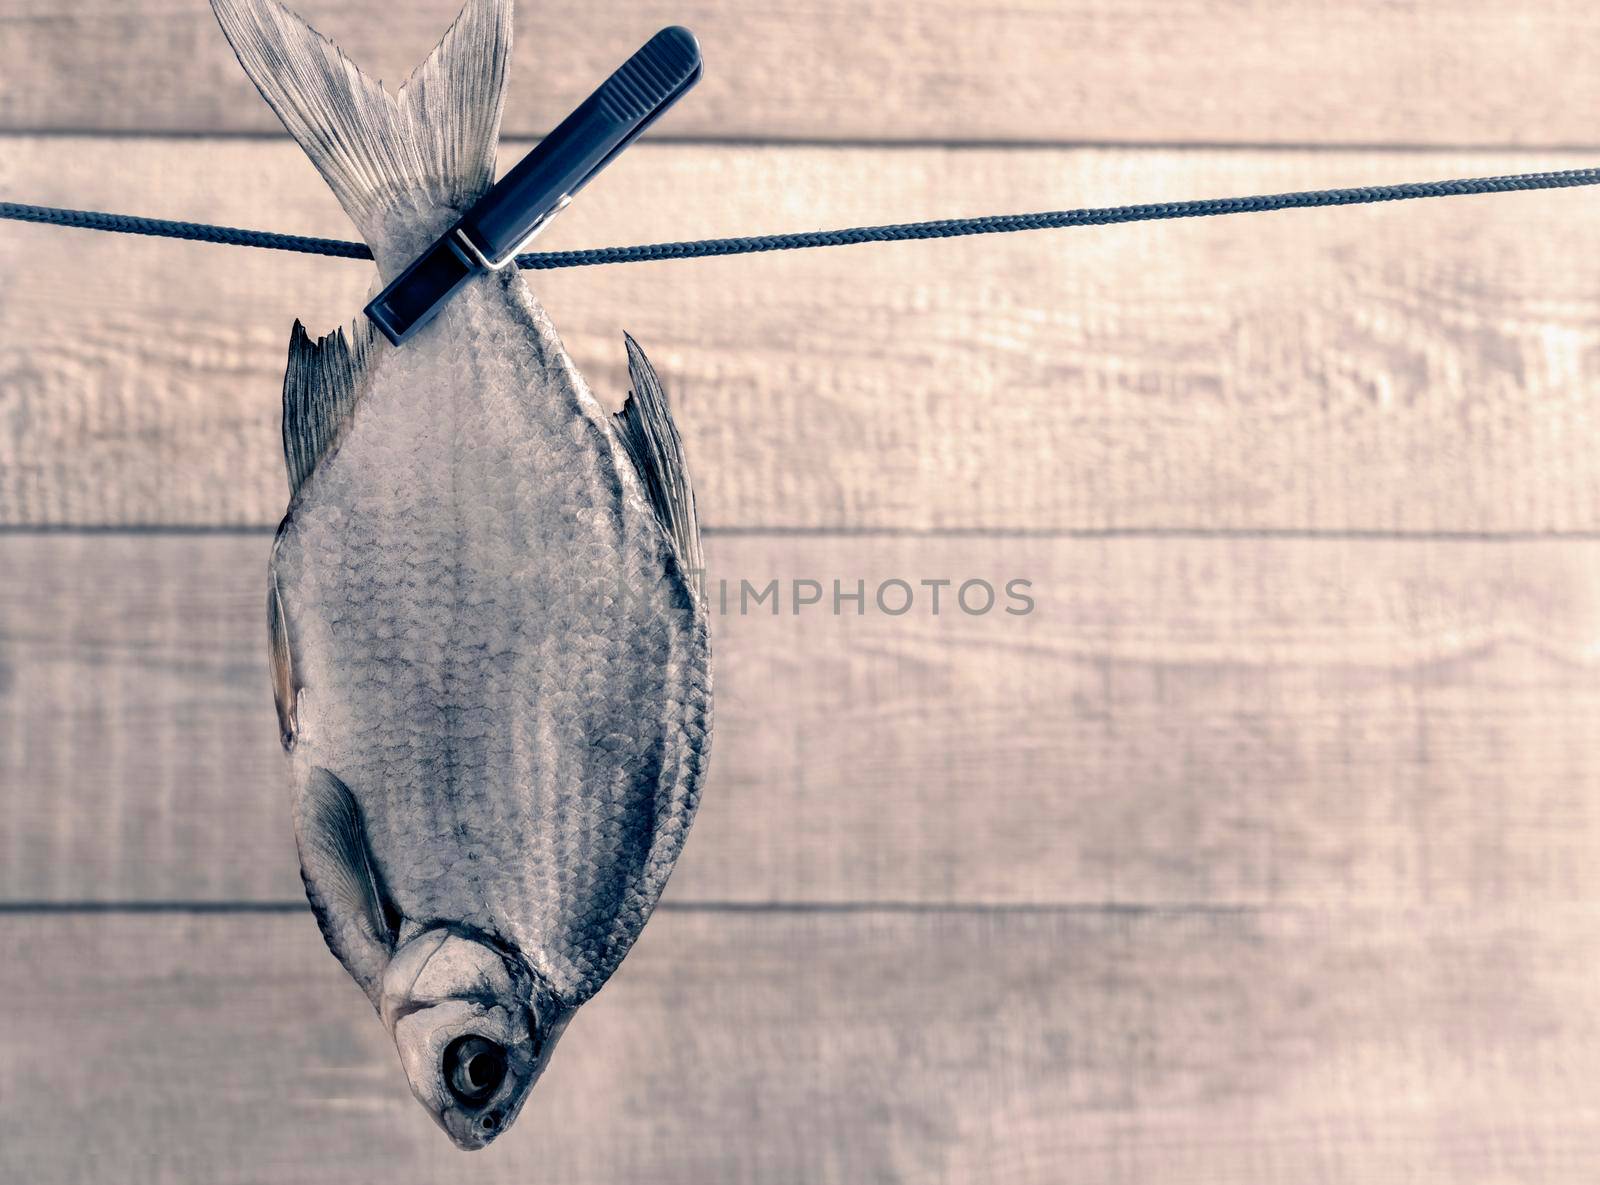 On the rope hangs a dried roach for further drying, fastened with clothespins. Presented on a wooden background.